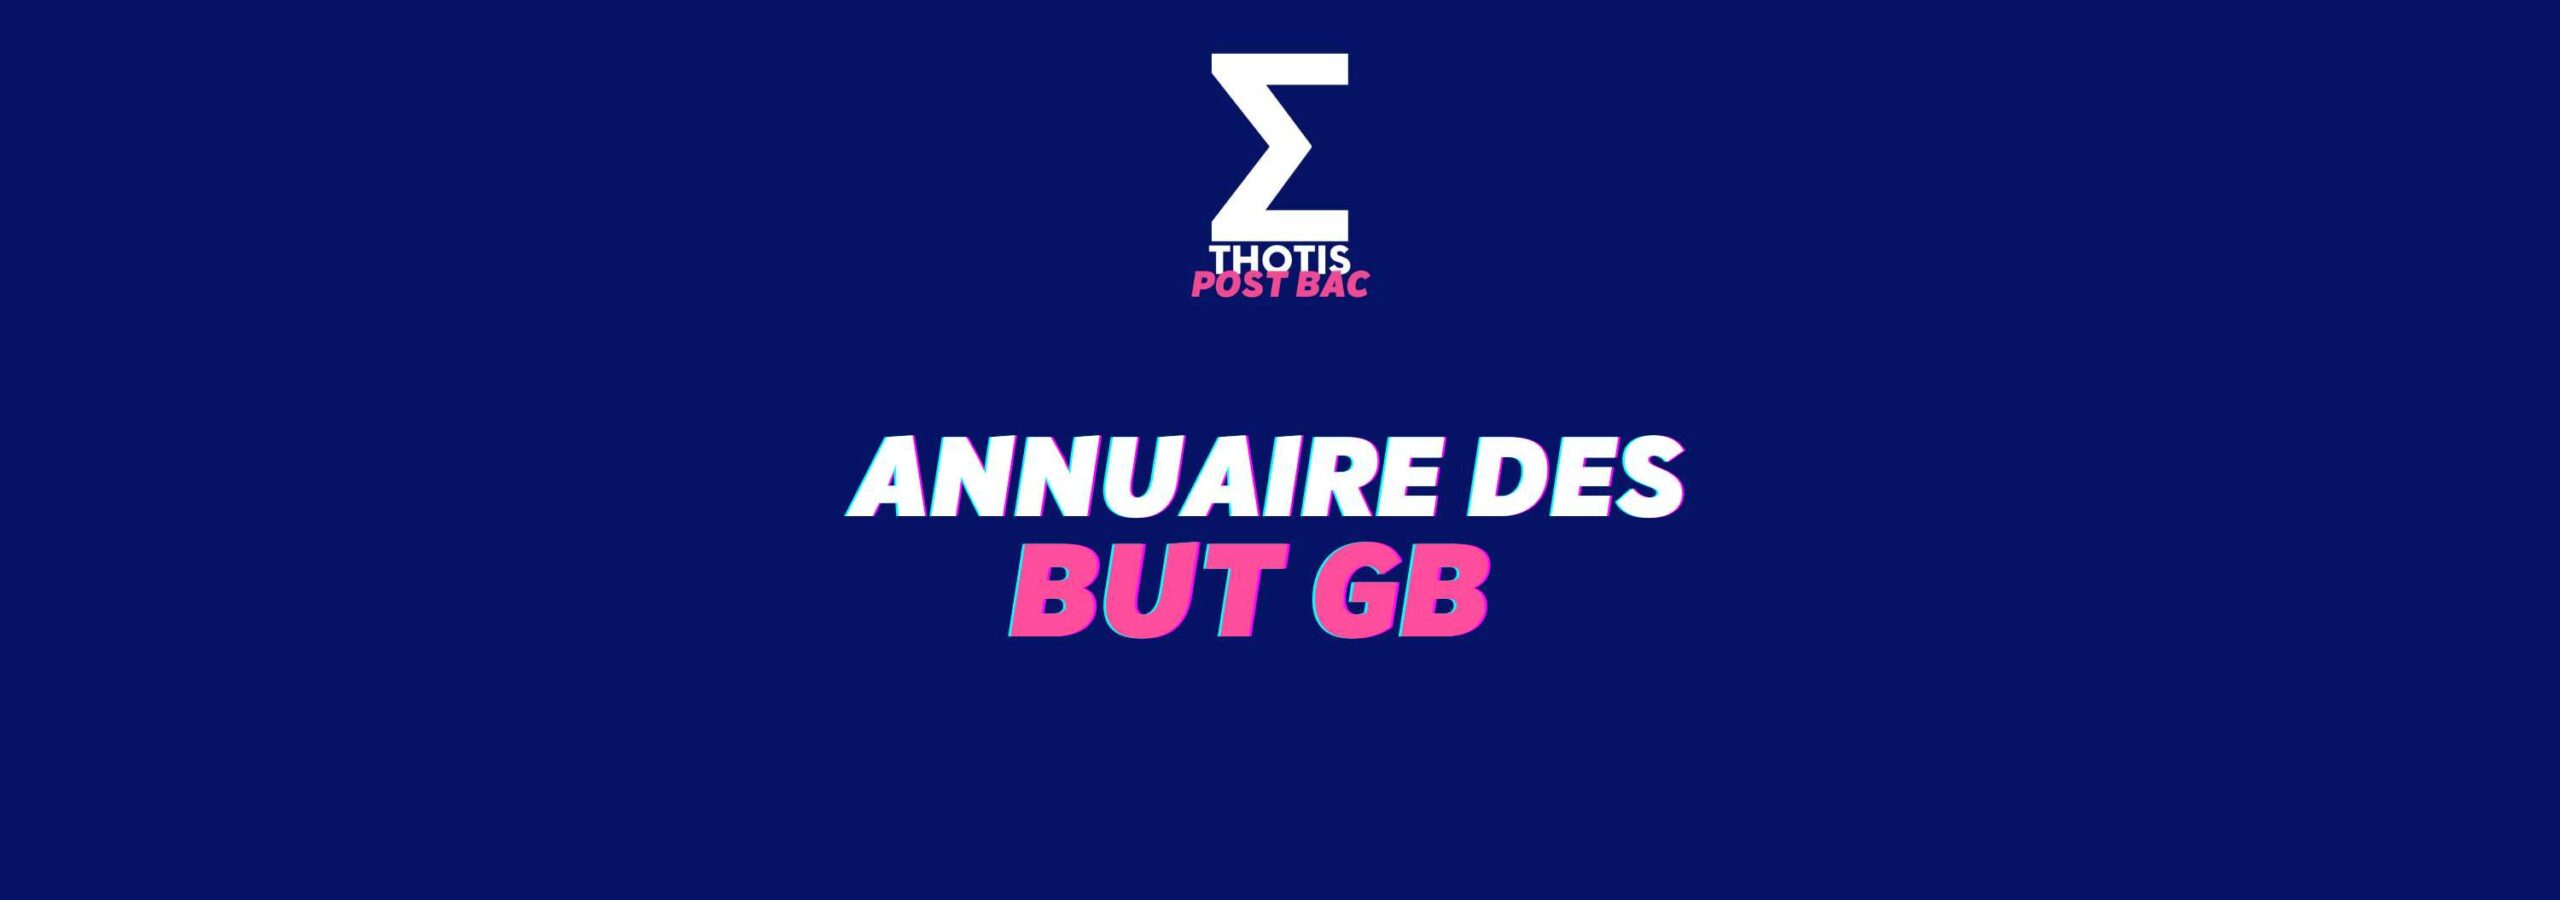 annuaire BUT GB